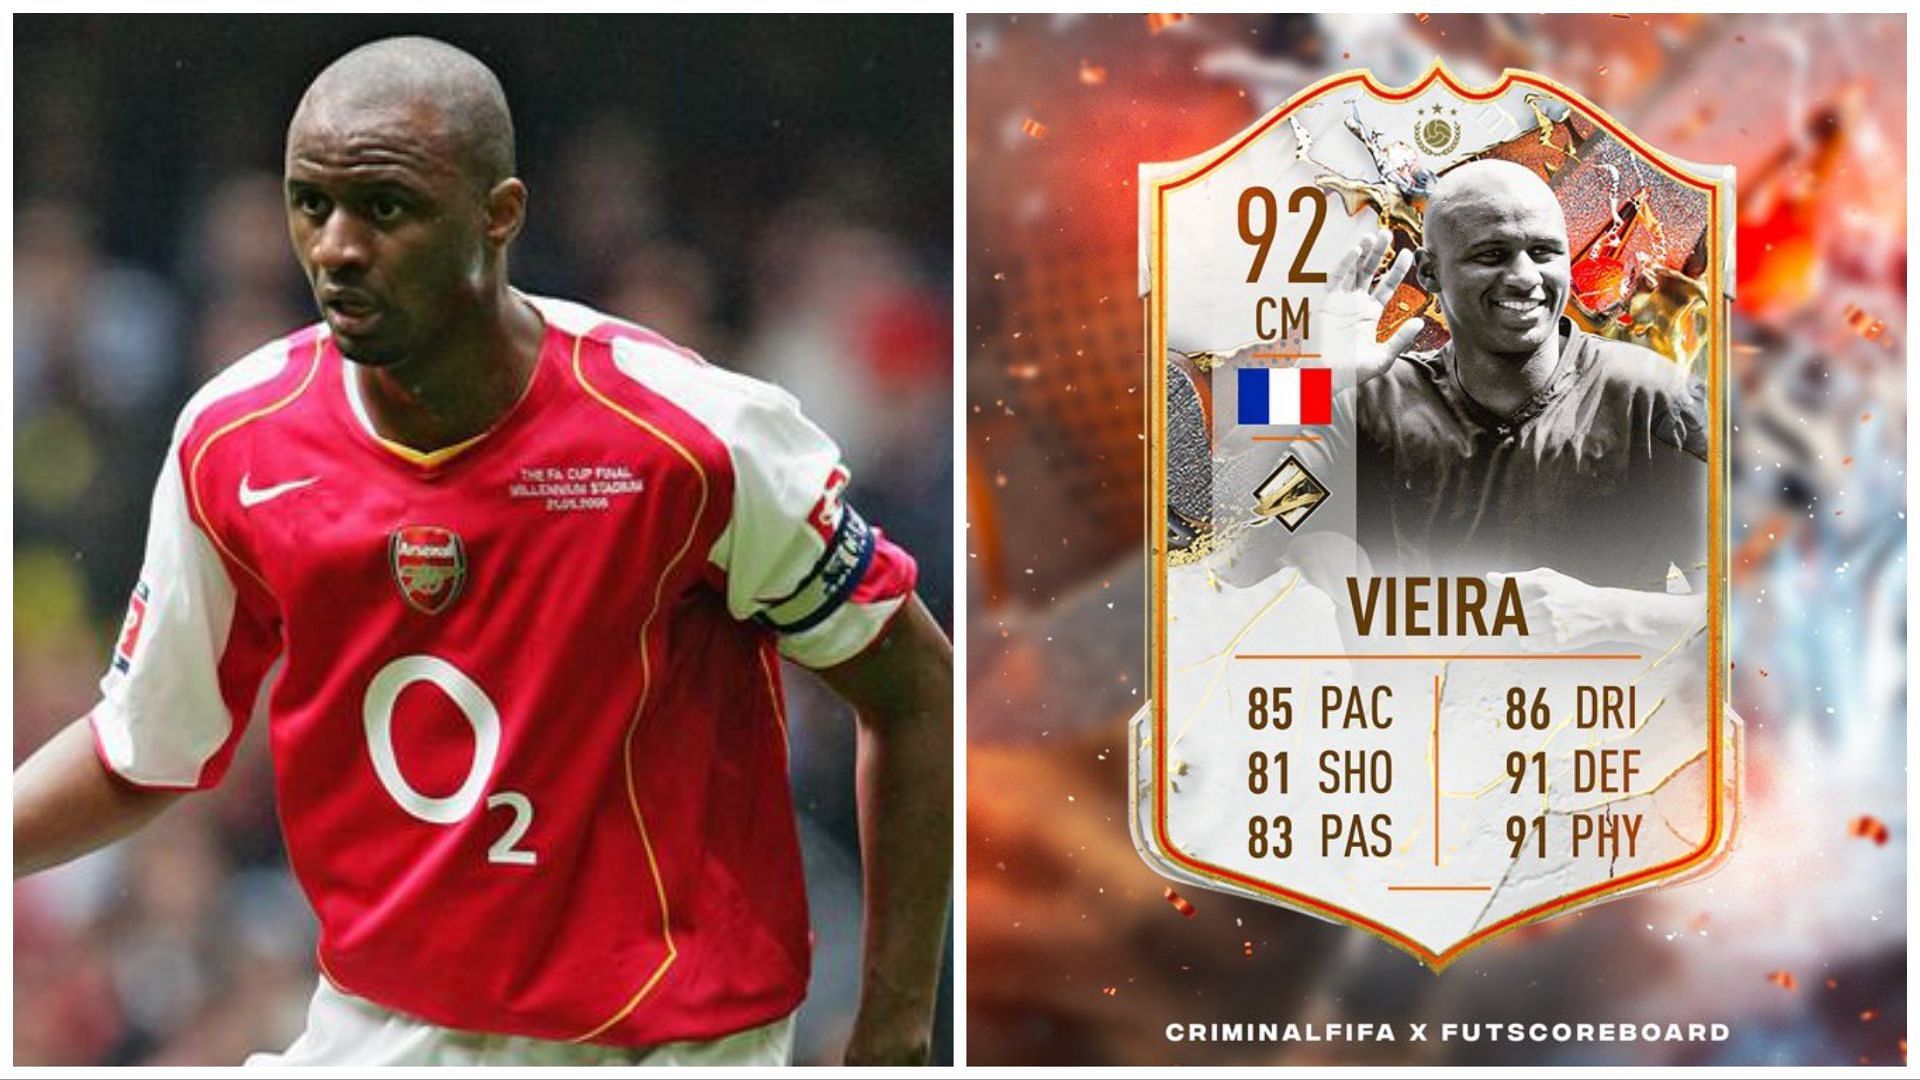 Trophy Titans Vieira has been leaked (Images via Getty and Twitter/FUT Scoreboard)